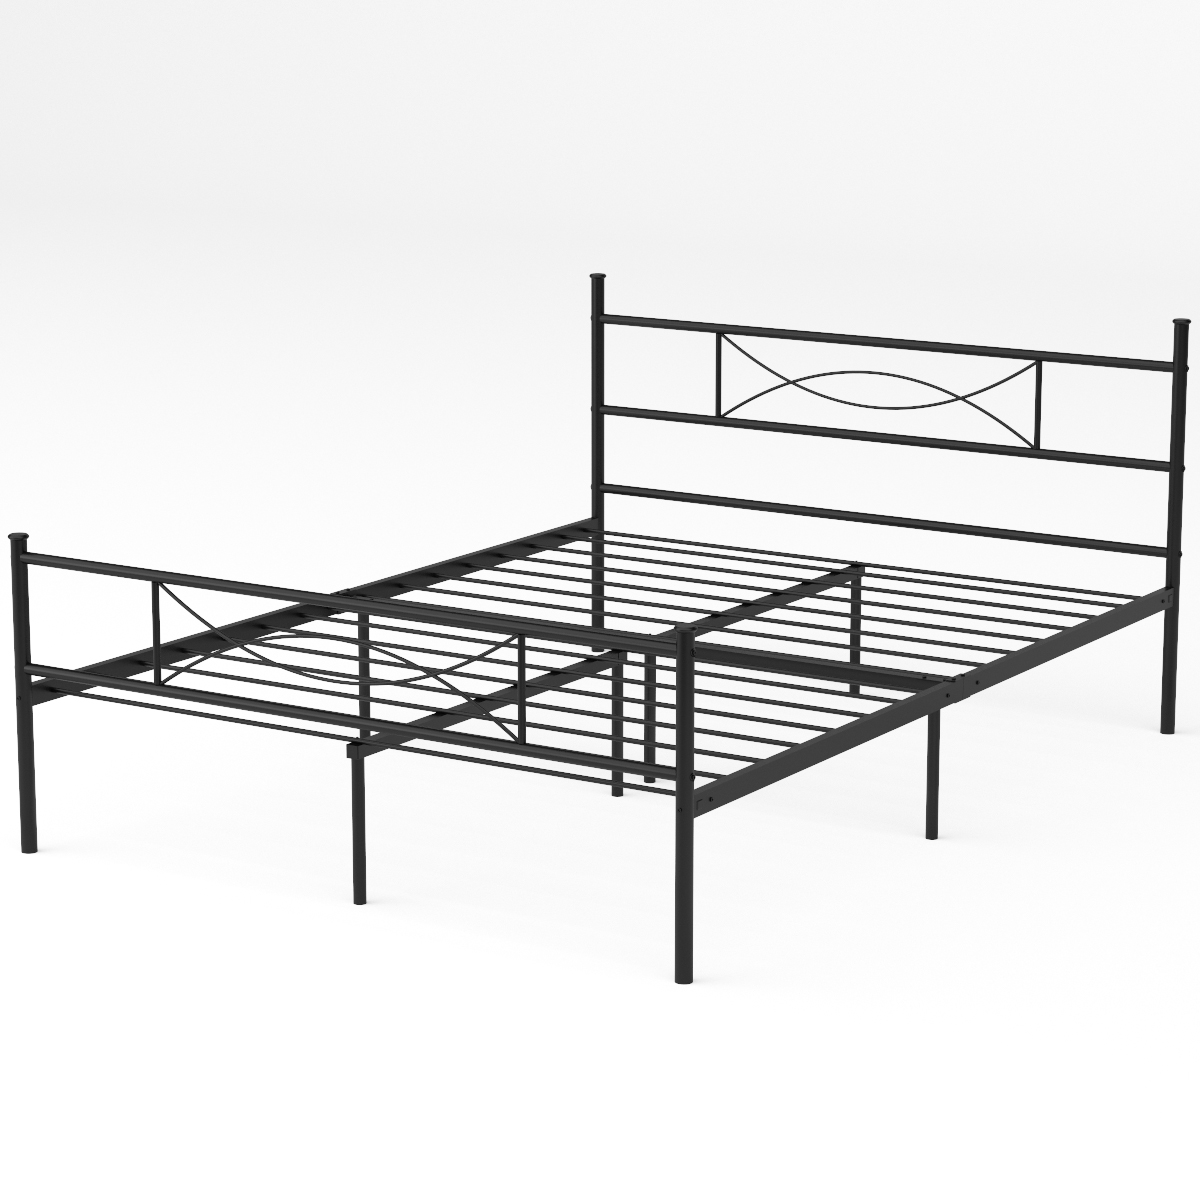 Simlife Twin Full Queen Bowknot Metal, Full Size Bed Frame To Attach Headboard And Footboard